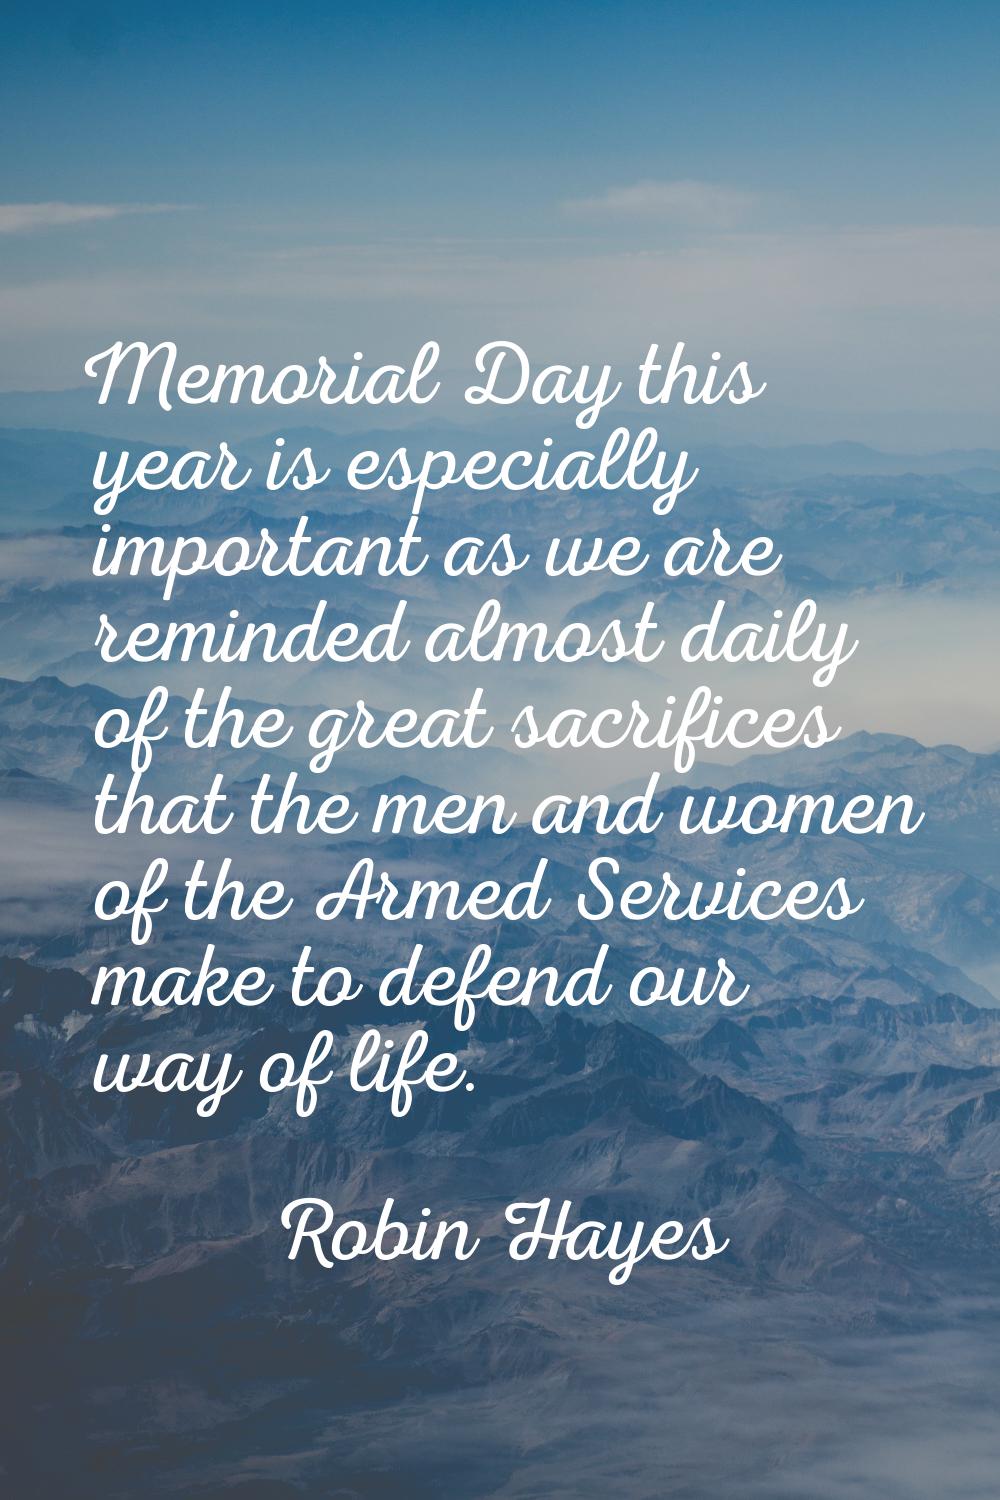 Memorial Day this year is especially important as we are reminded almost daily of the great sacrifi